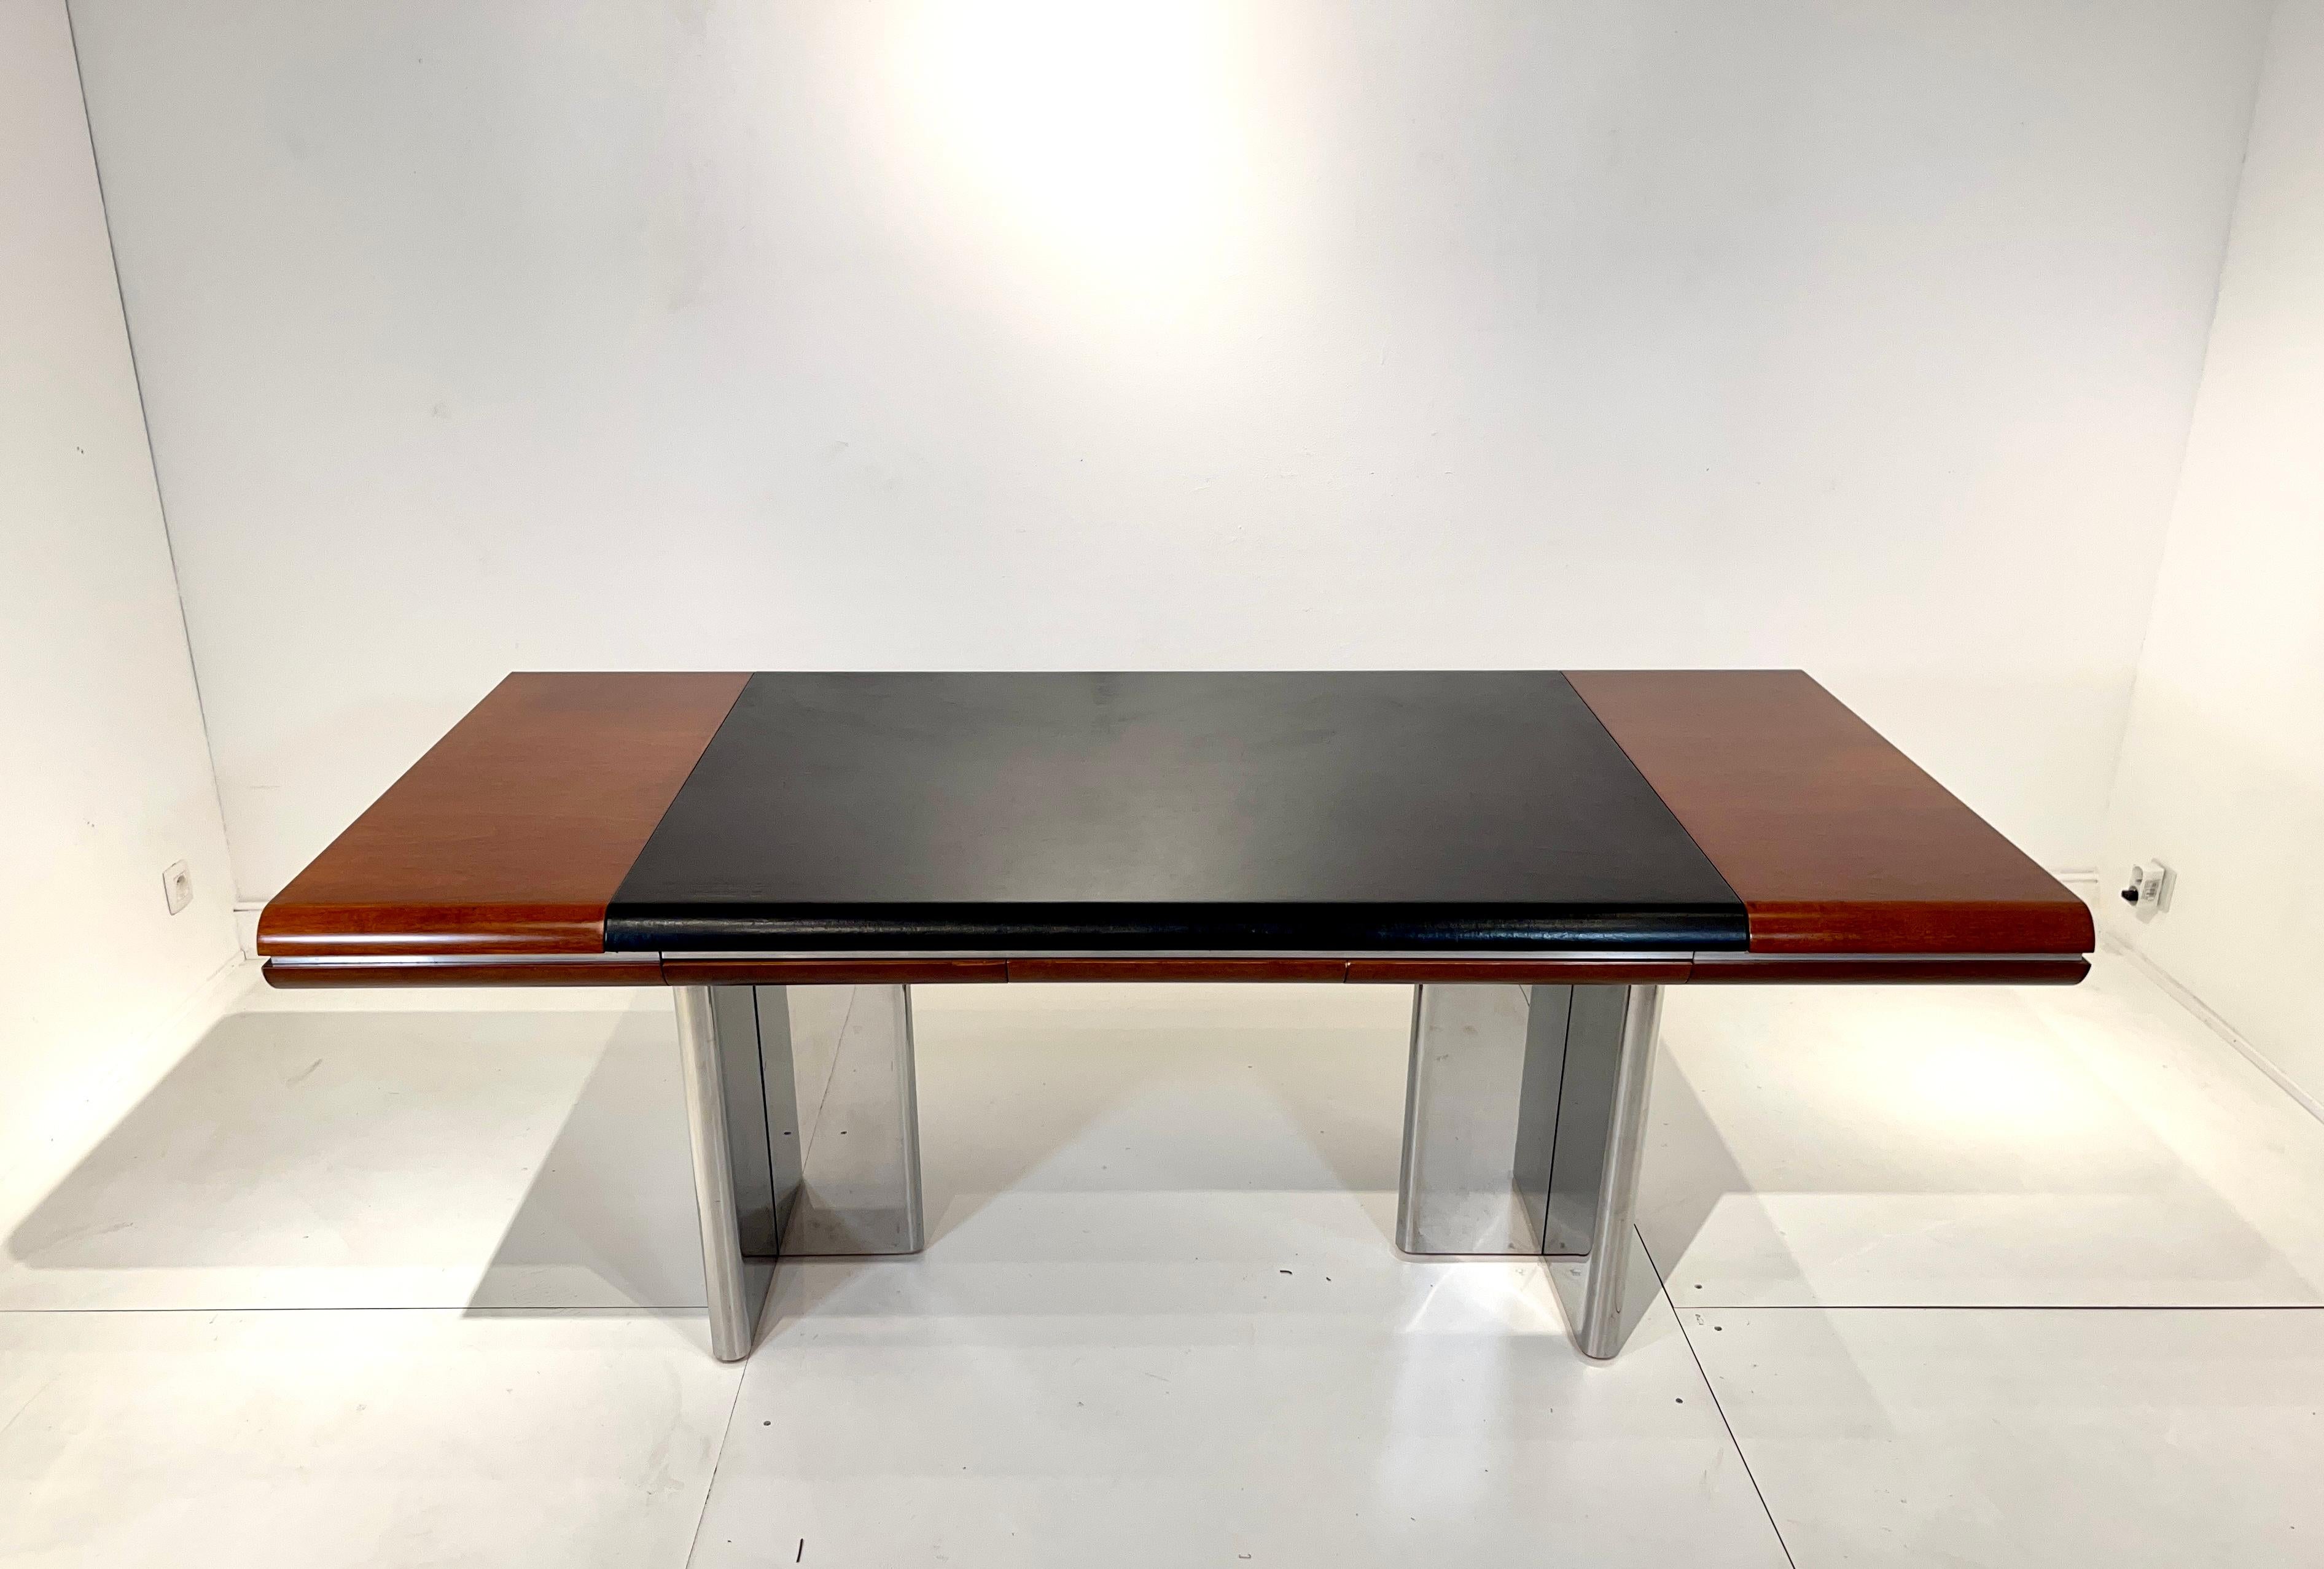 Hans Von Klier for Skipper, writing desks, in mahogany, leather, stainless steel, Italy, 1970s Impressive office desk designed by Hans von Klier. A striking combination of differently textured materials in three colors makes this desk an intriguing